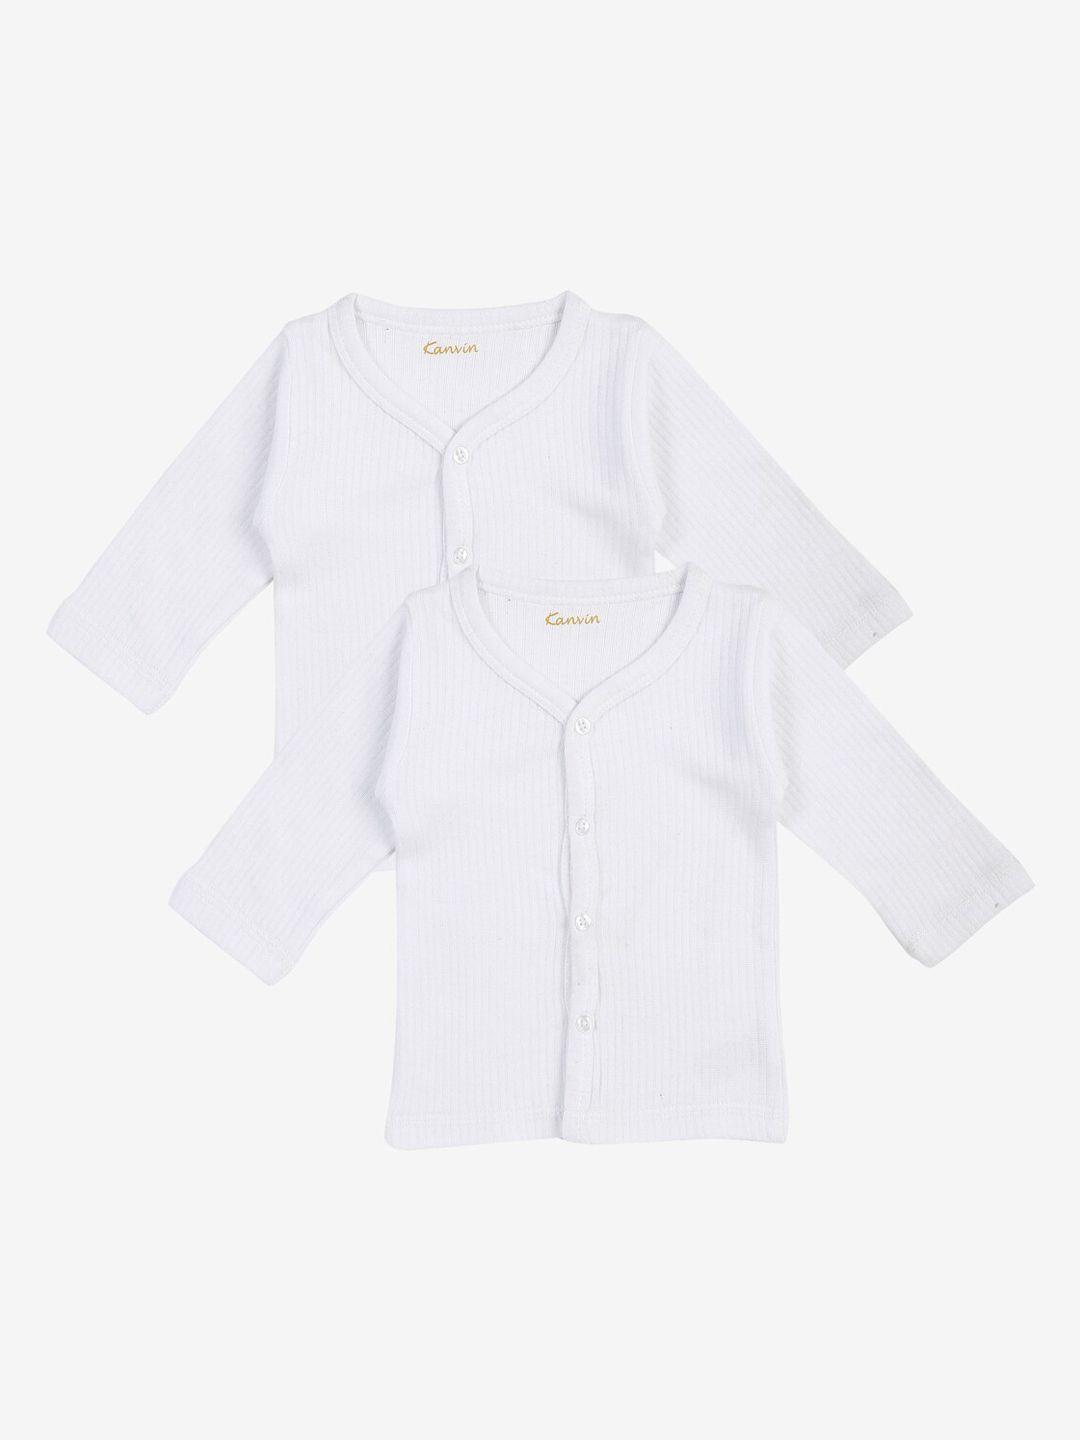 kanvin-boys-white-set-of-2-solid-thermal-tops